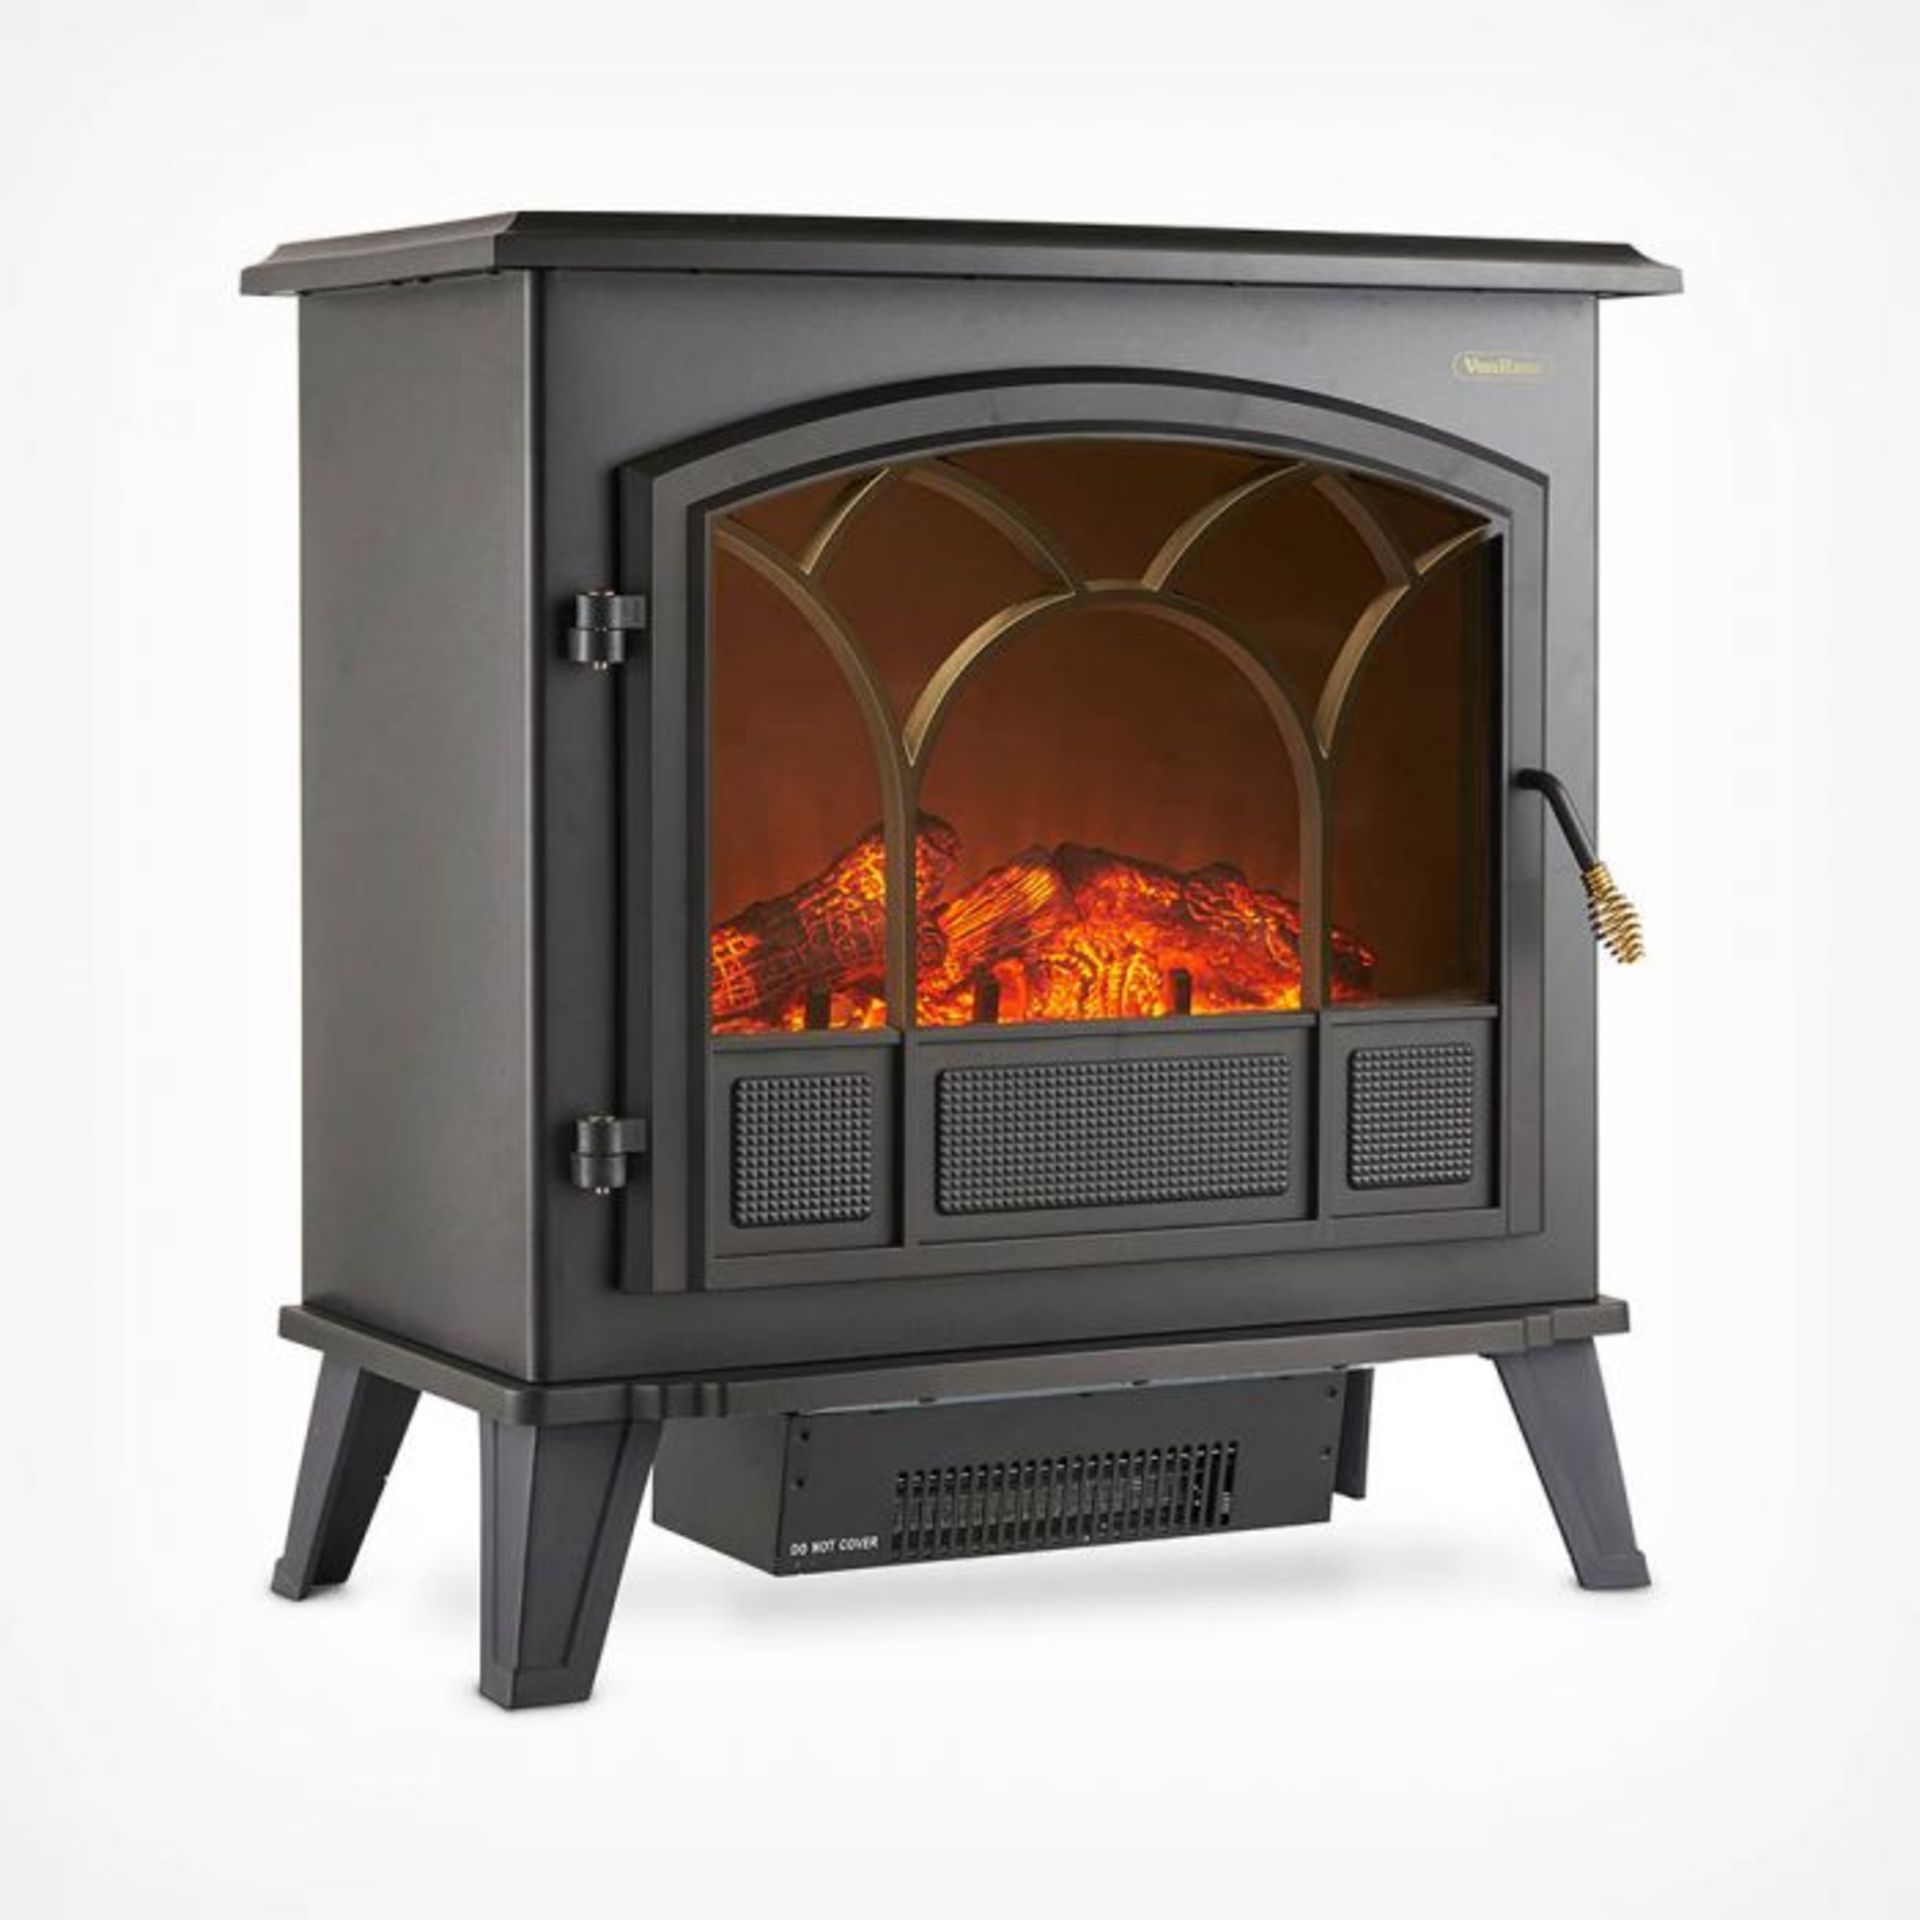 (S24) 1850W Large Black Stove Heater 1850W PORTABLE ELECTRIC STOVE HEATER – classically-desi... - Image 2 of 4